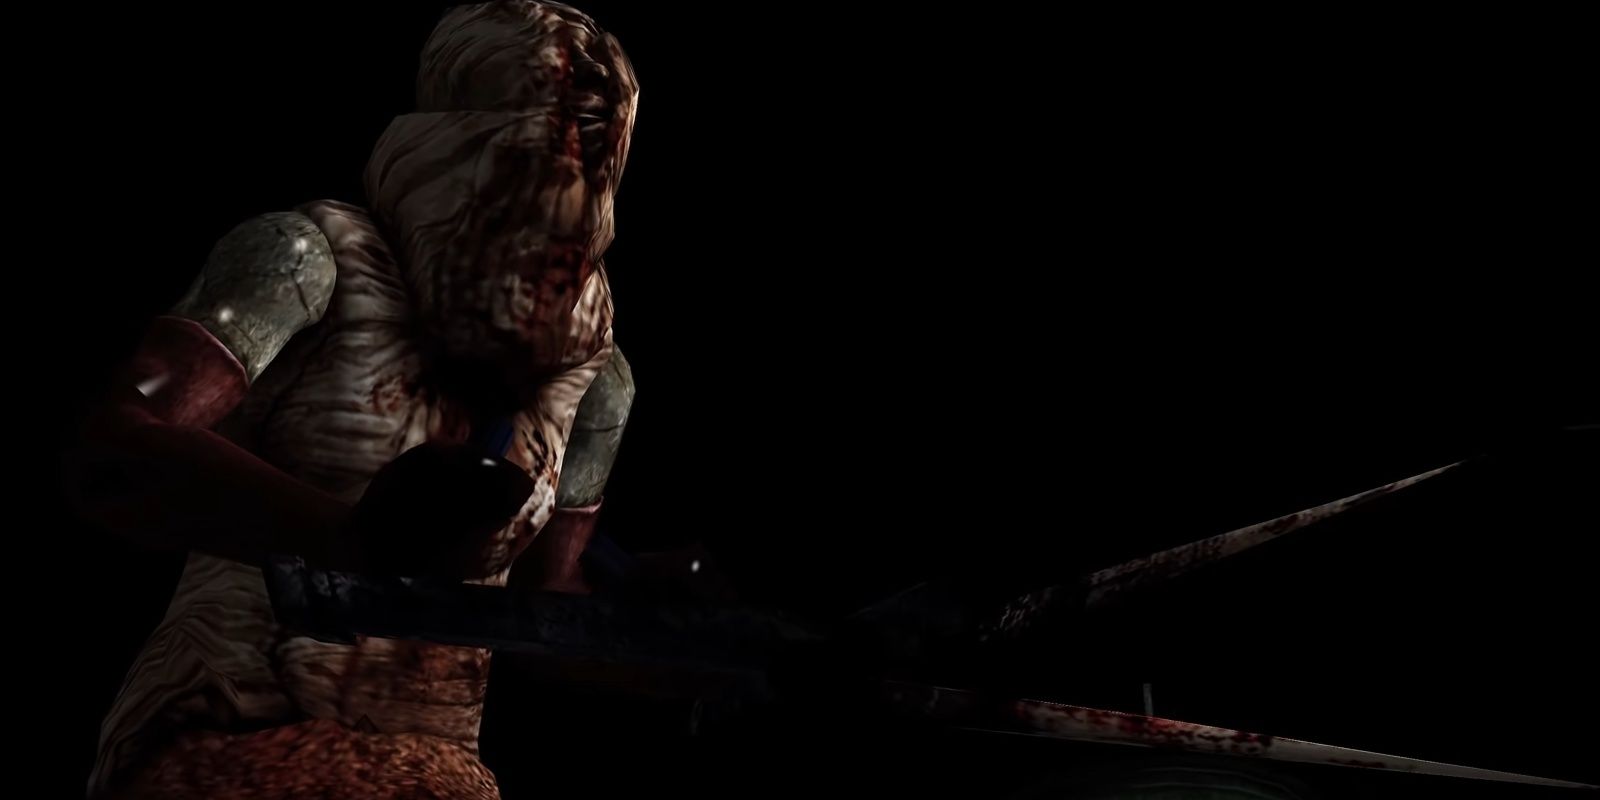 The Missionary from Silent Hill 3.